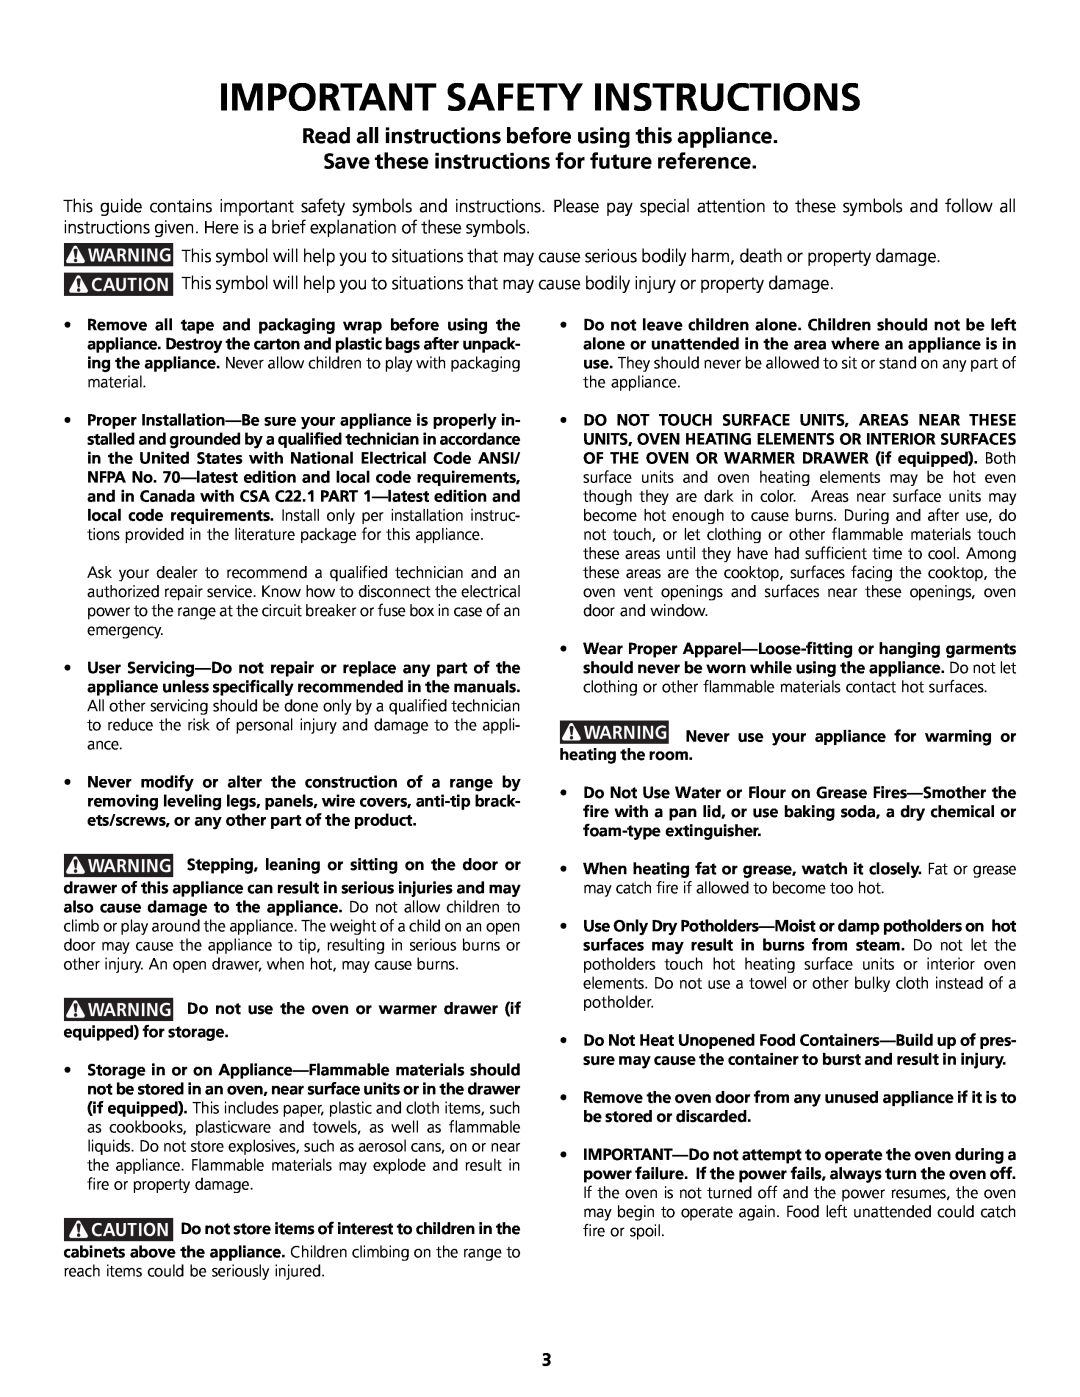 Frigidaire 318200830 Important Safety Instructions, Read all instructions before using this appliance 